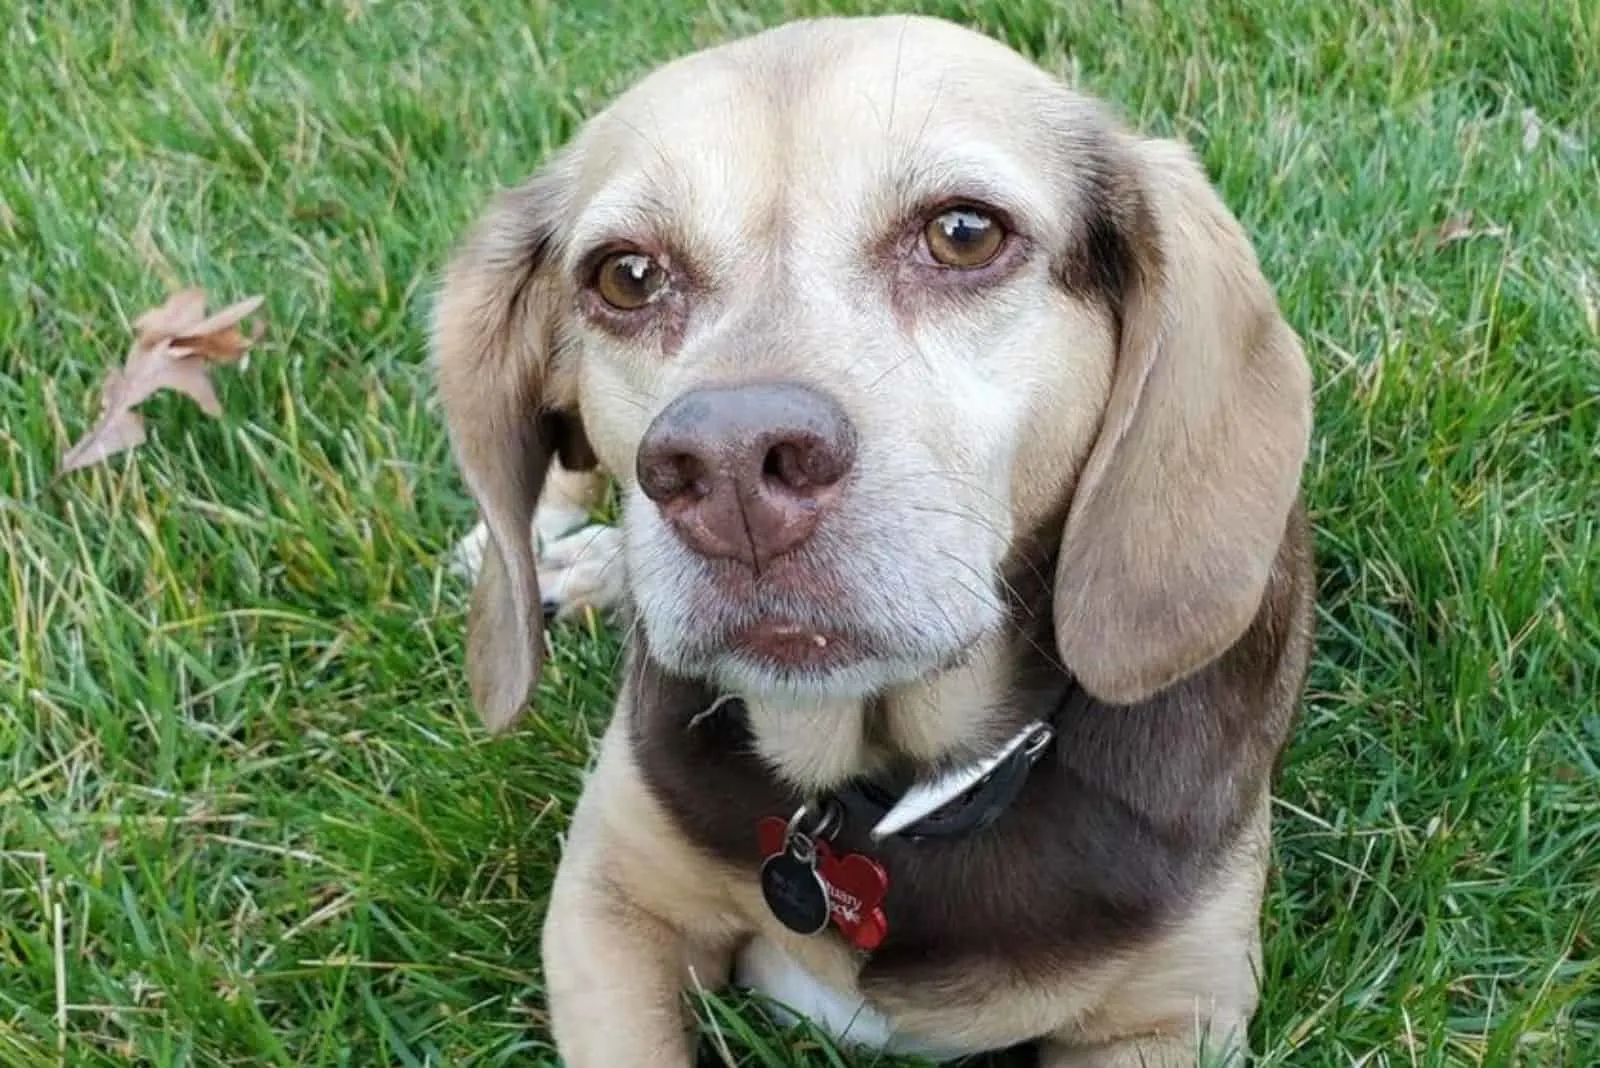 Abby the beagle abandoned at a shelter